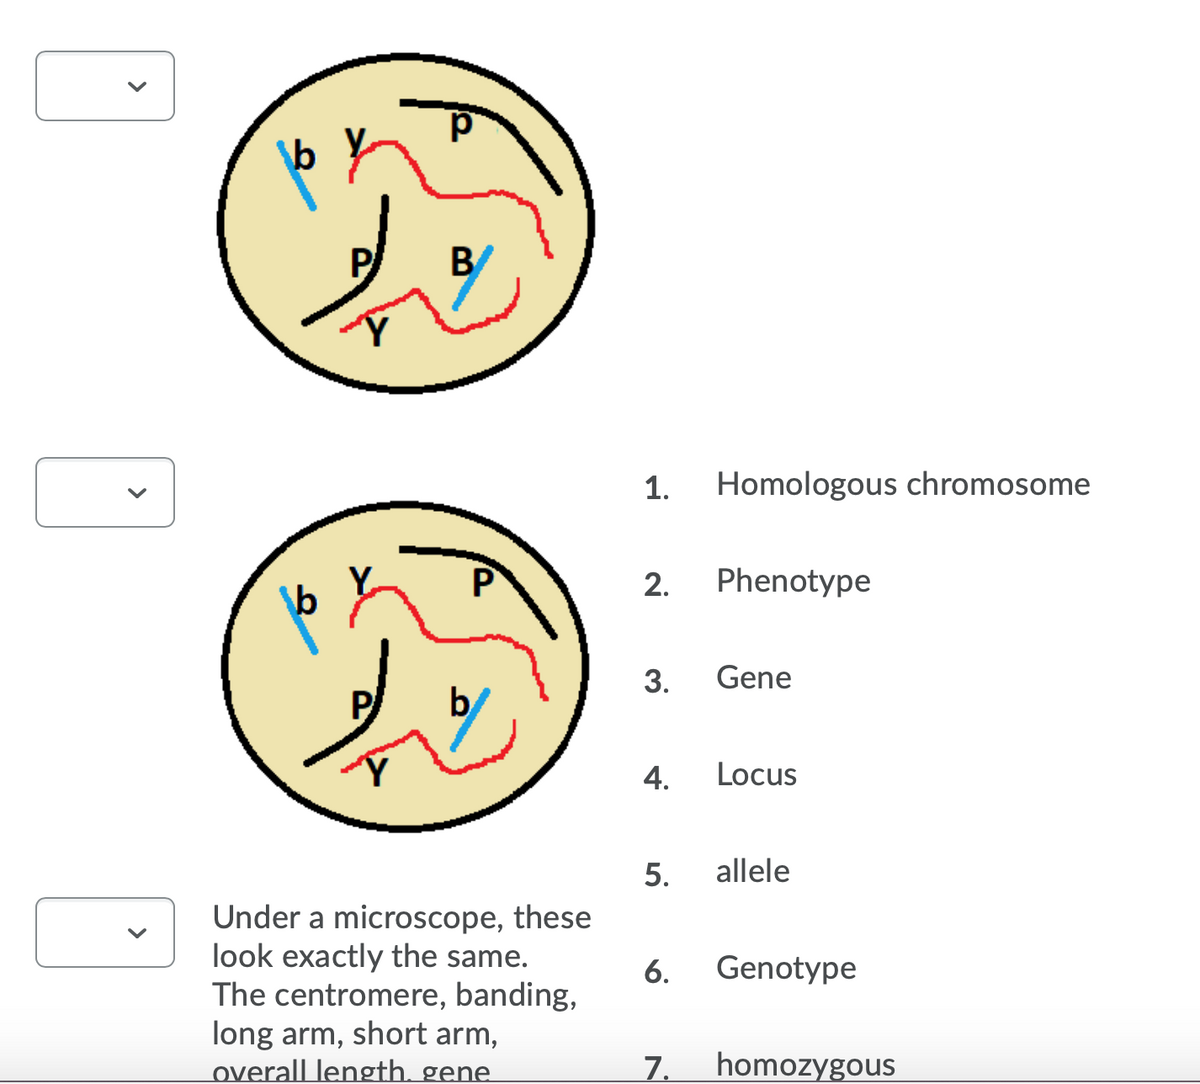 B
1.
Homologous chromosome
Y.
2.
Phenotype
\b
3.
Gene
b
4.
Locus
5.
allele
Under a microscope, these
look exactly the same.
The centromere, banding,
long arm, short arm,
overall length, gene.
6.
Genotype
7.
homozygous
>
>
